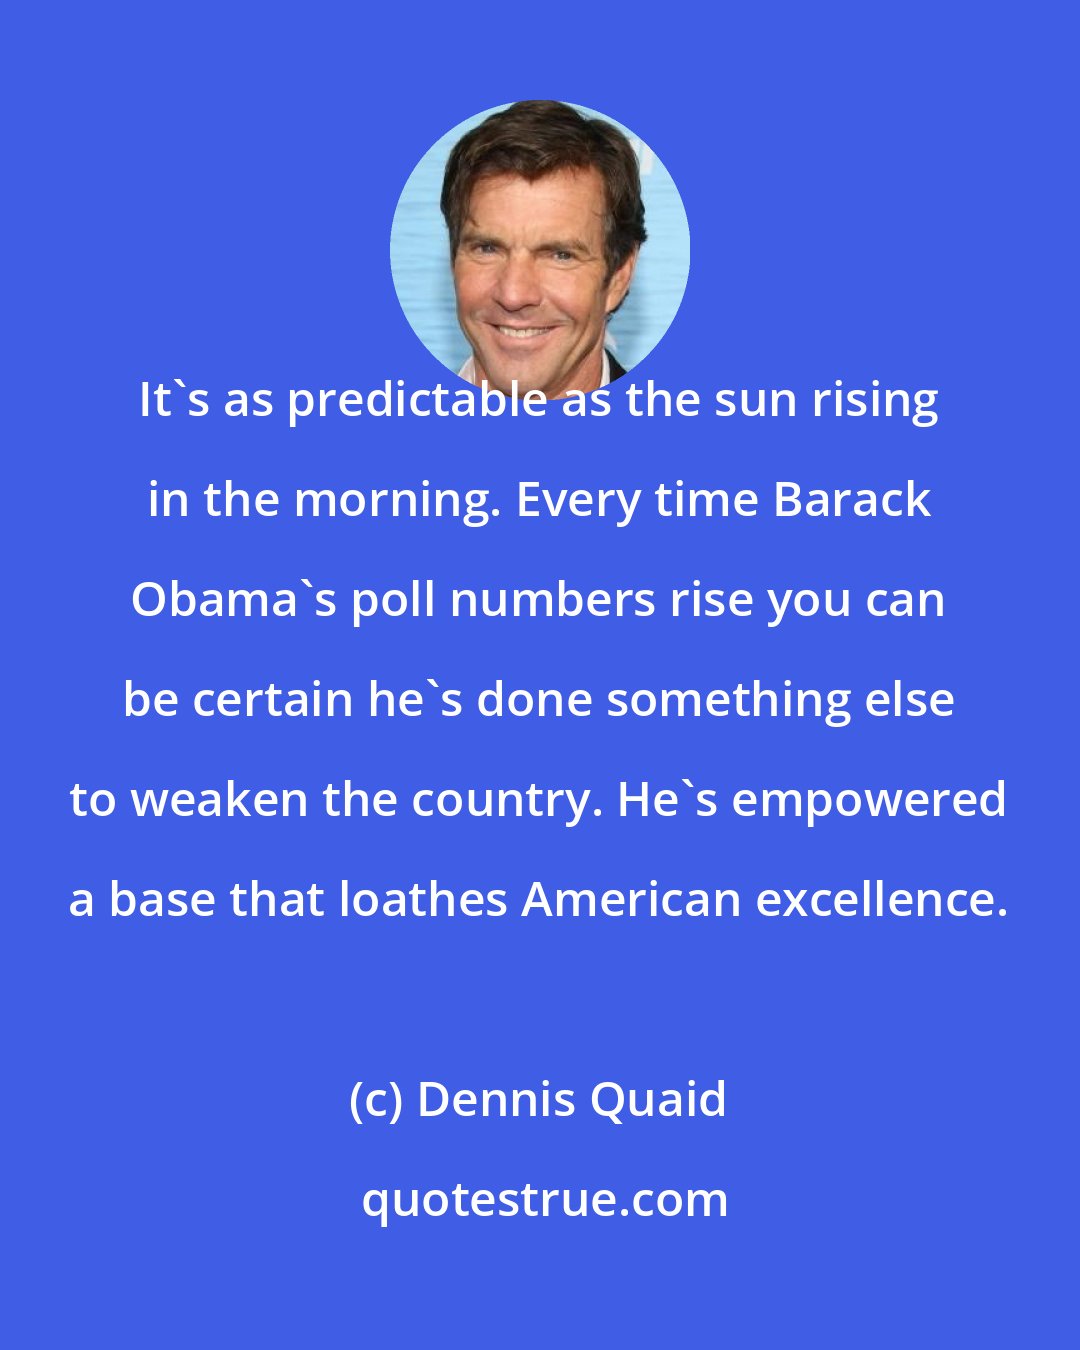 Dennis Quaid: It's as predictable as the sun rising in the morning. Every time Barack Obama's poll numbers rise you can be certain he's done something else to weaken the country. He's empowered a base that loathes American excellence.